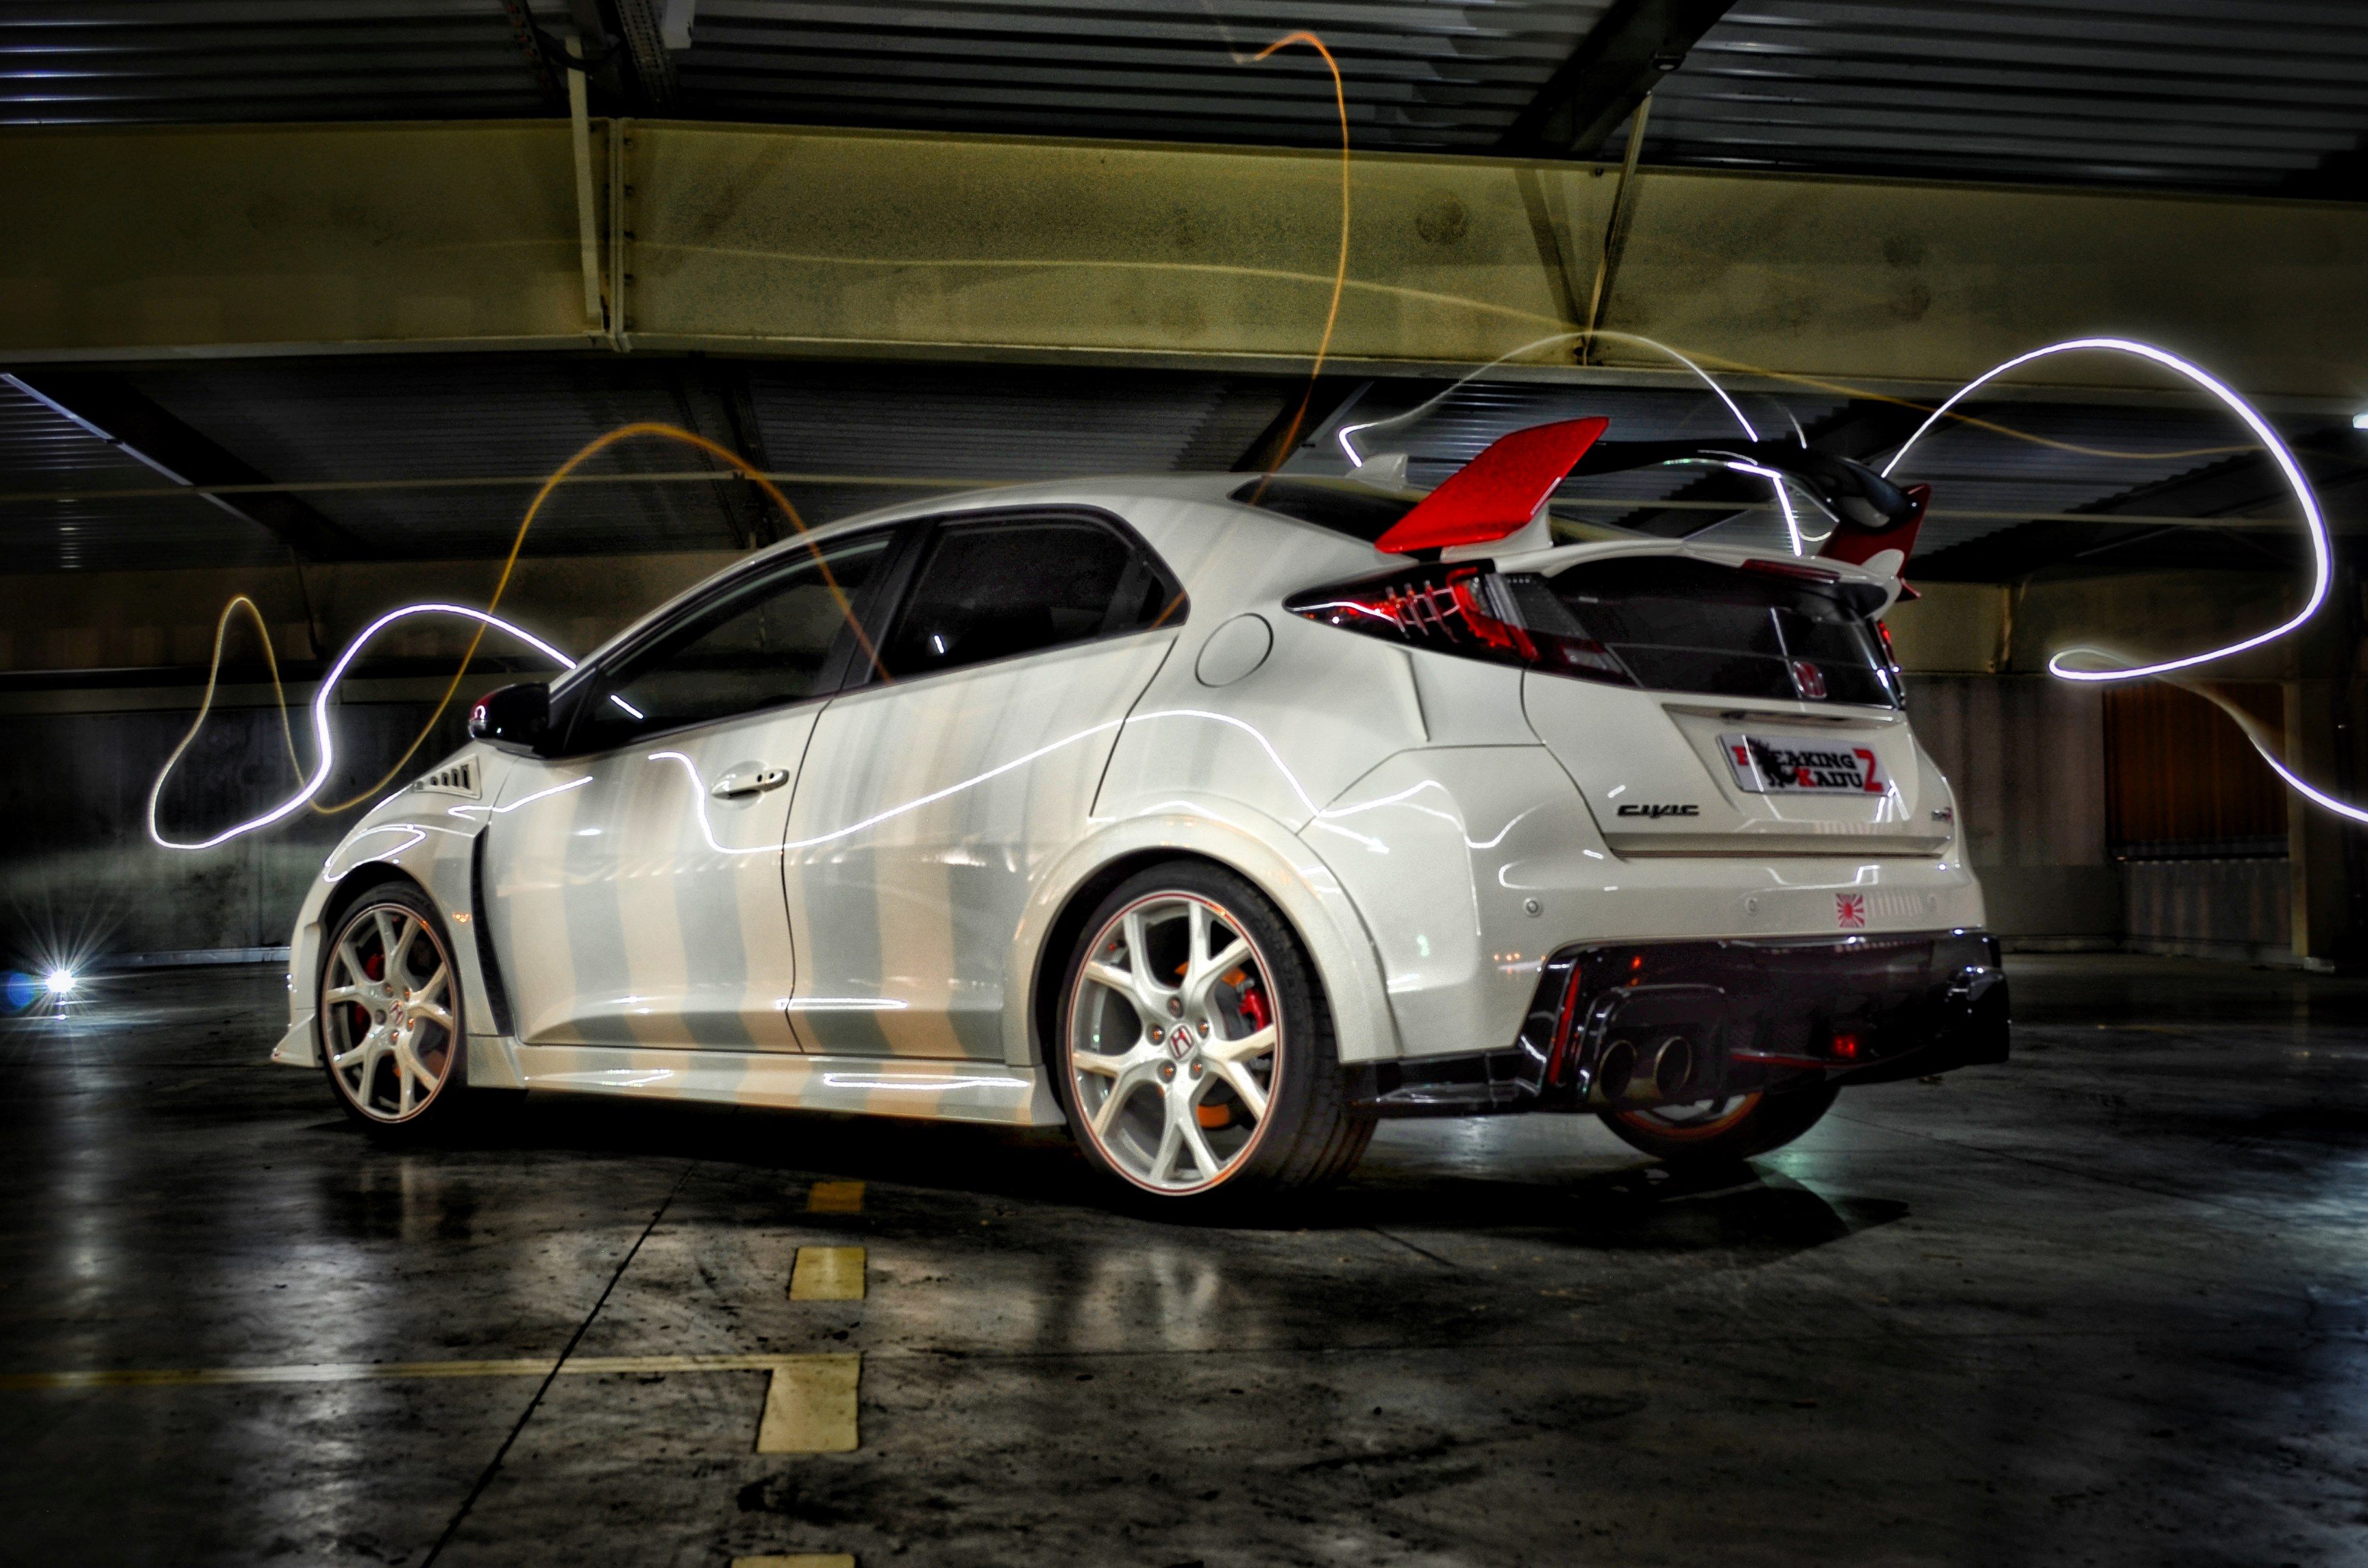 Honda Civic Backgrounds Picture - Wallpaper Cave